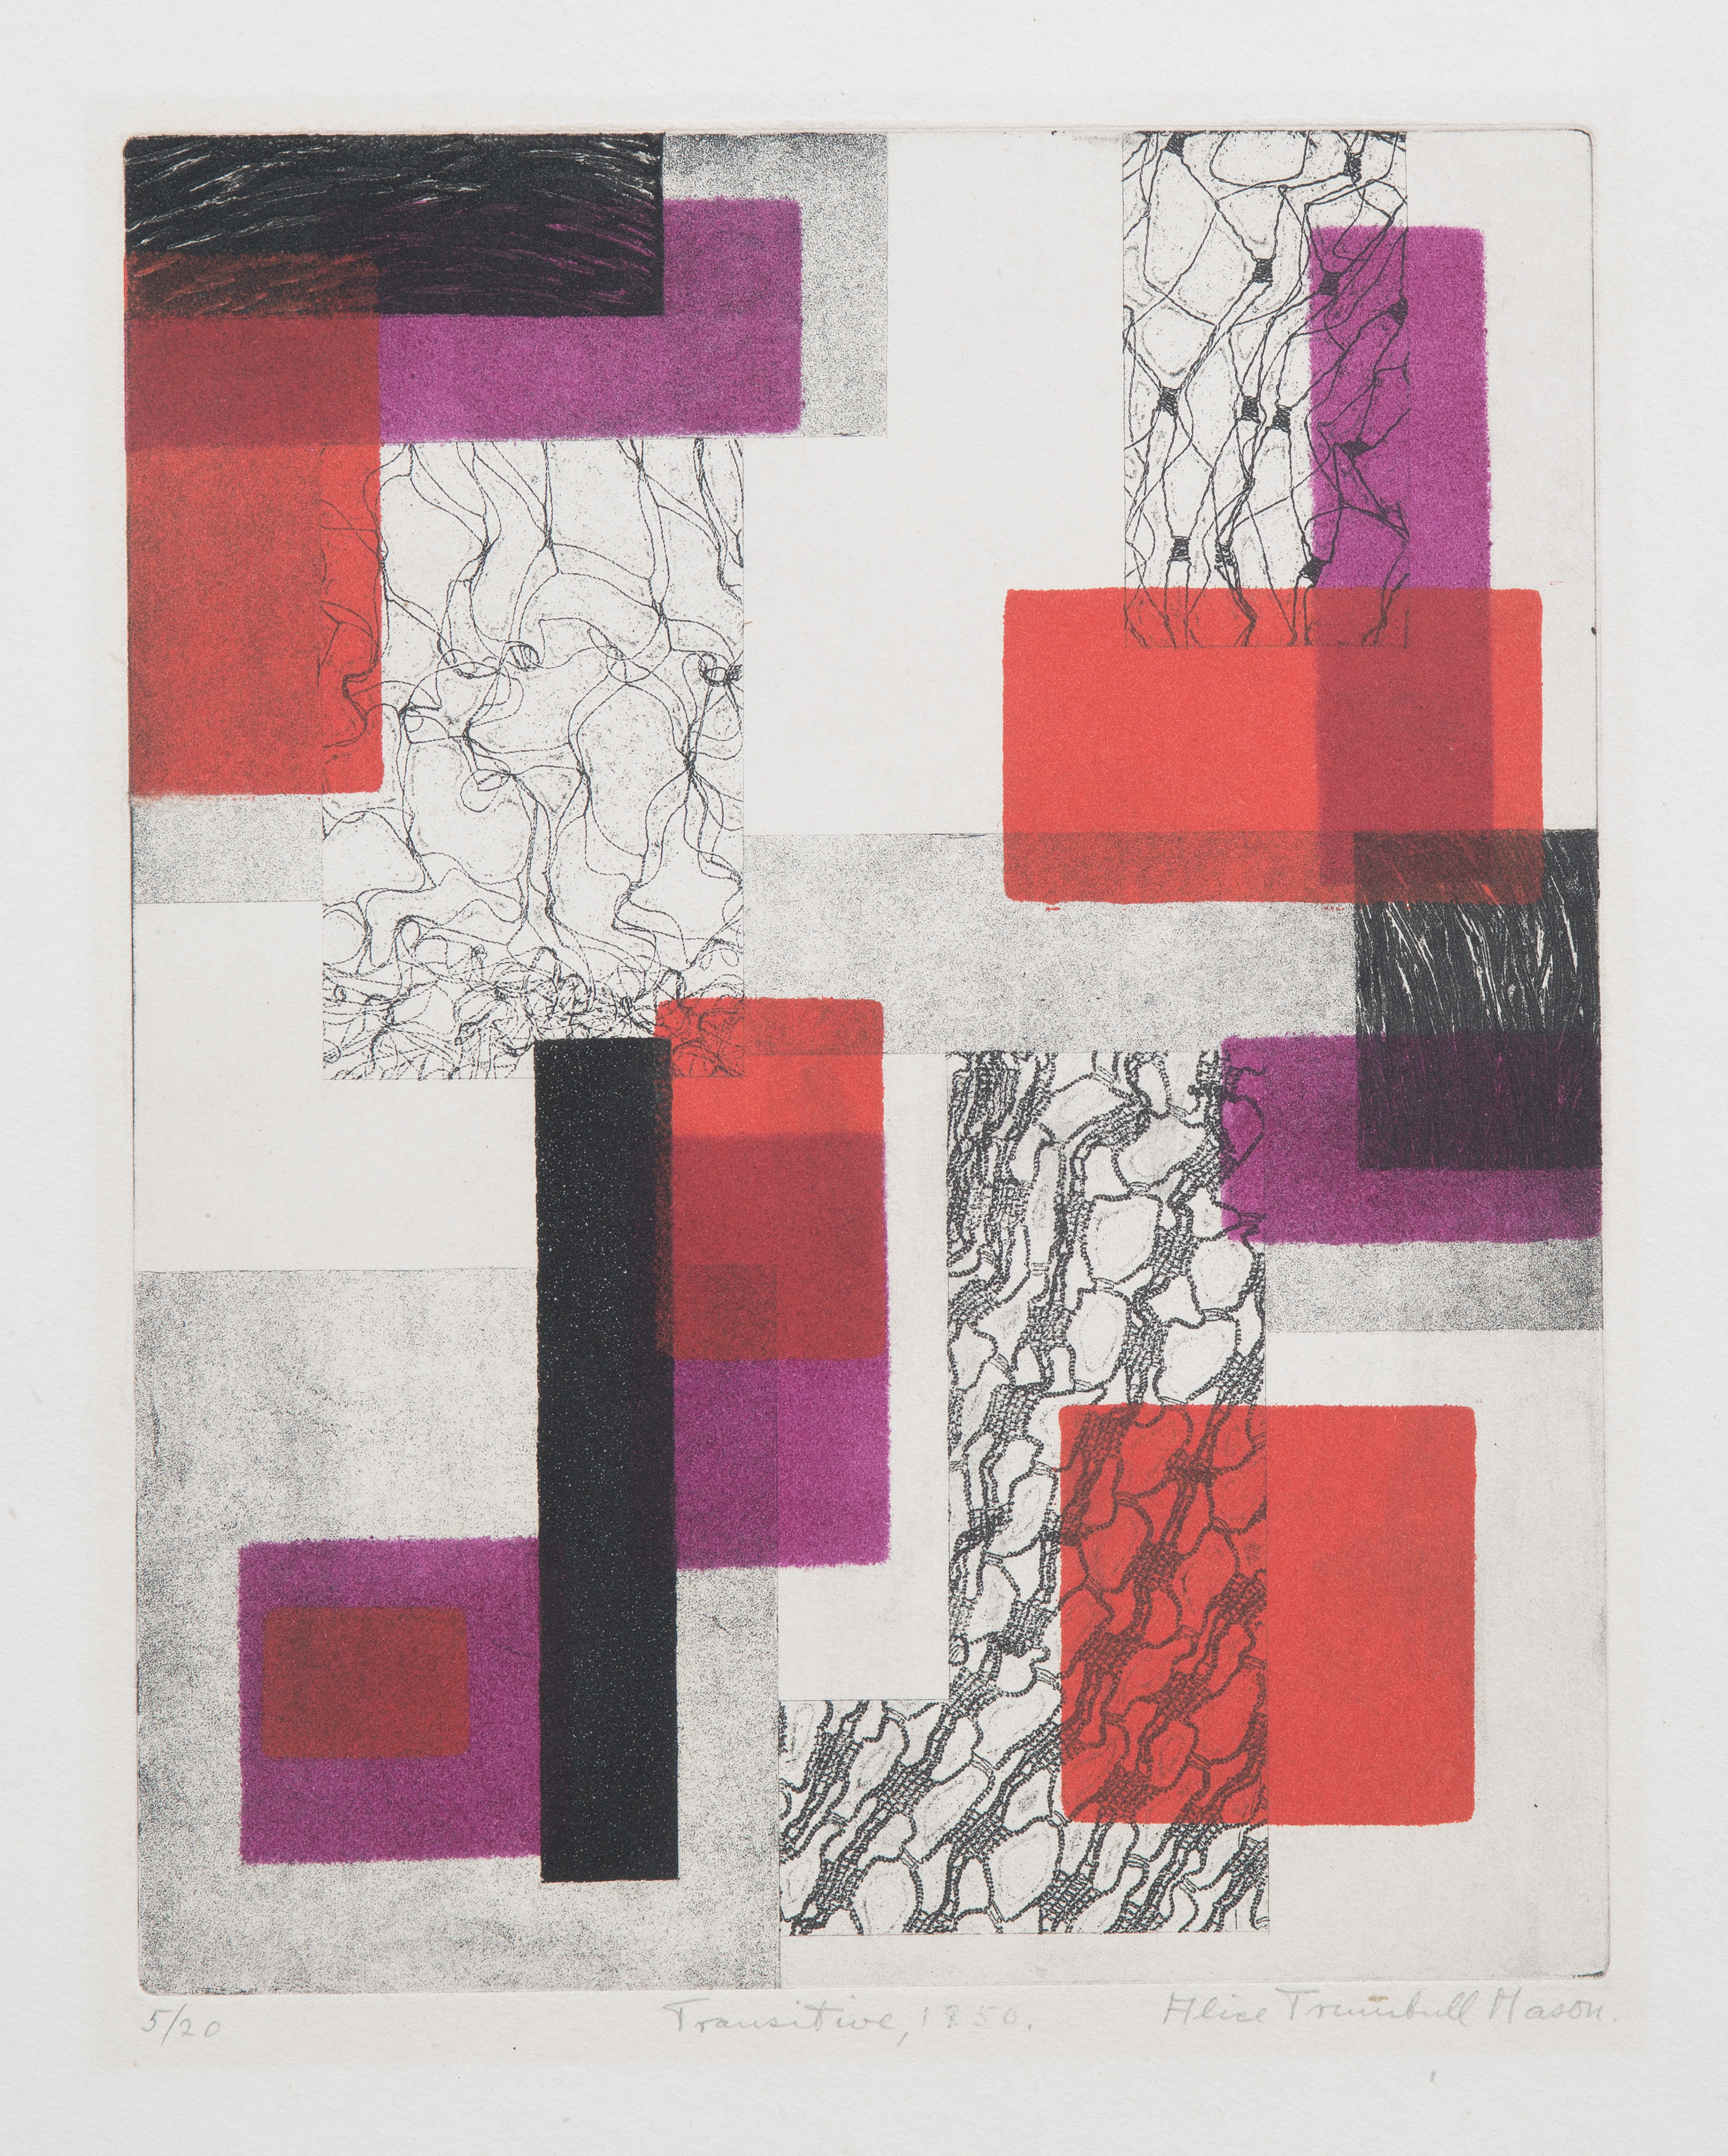 Abstract etching consisting of red, pink, purple, and black rectangles, as well as rectangles filled with web-like lines, on white paper.